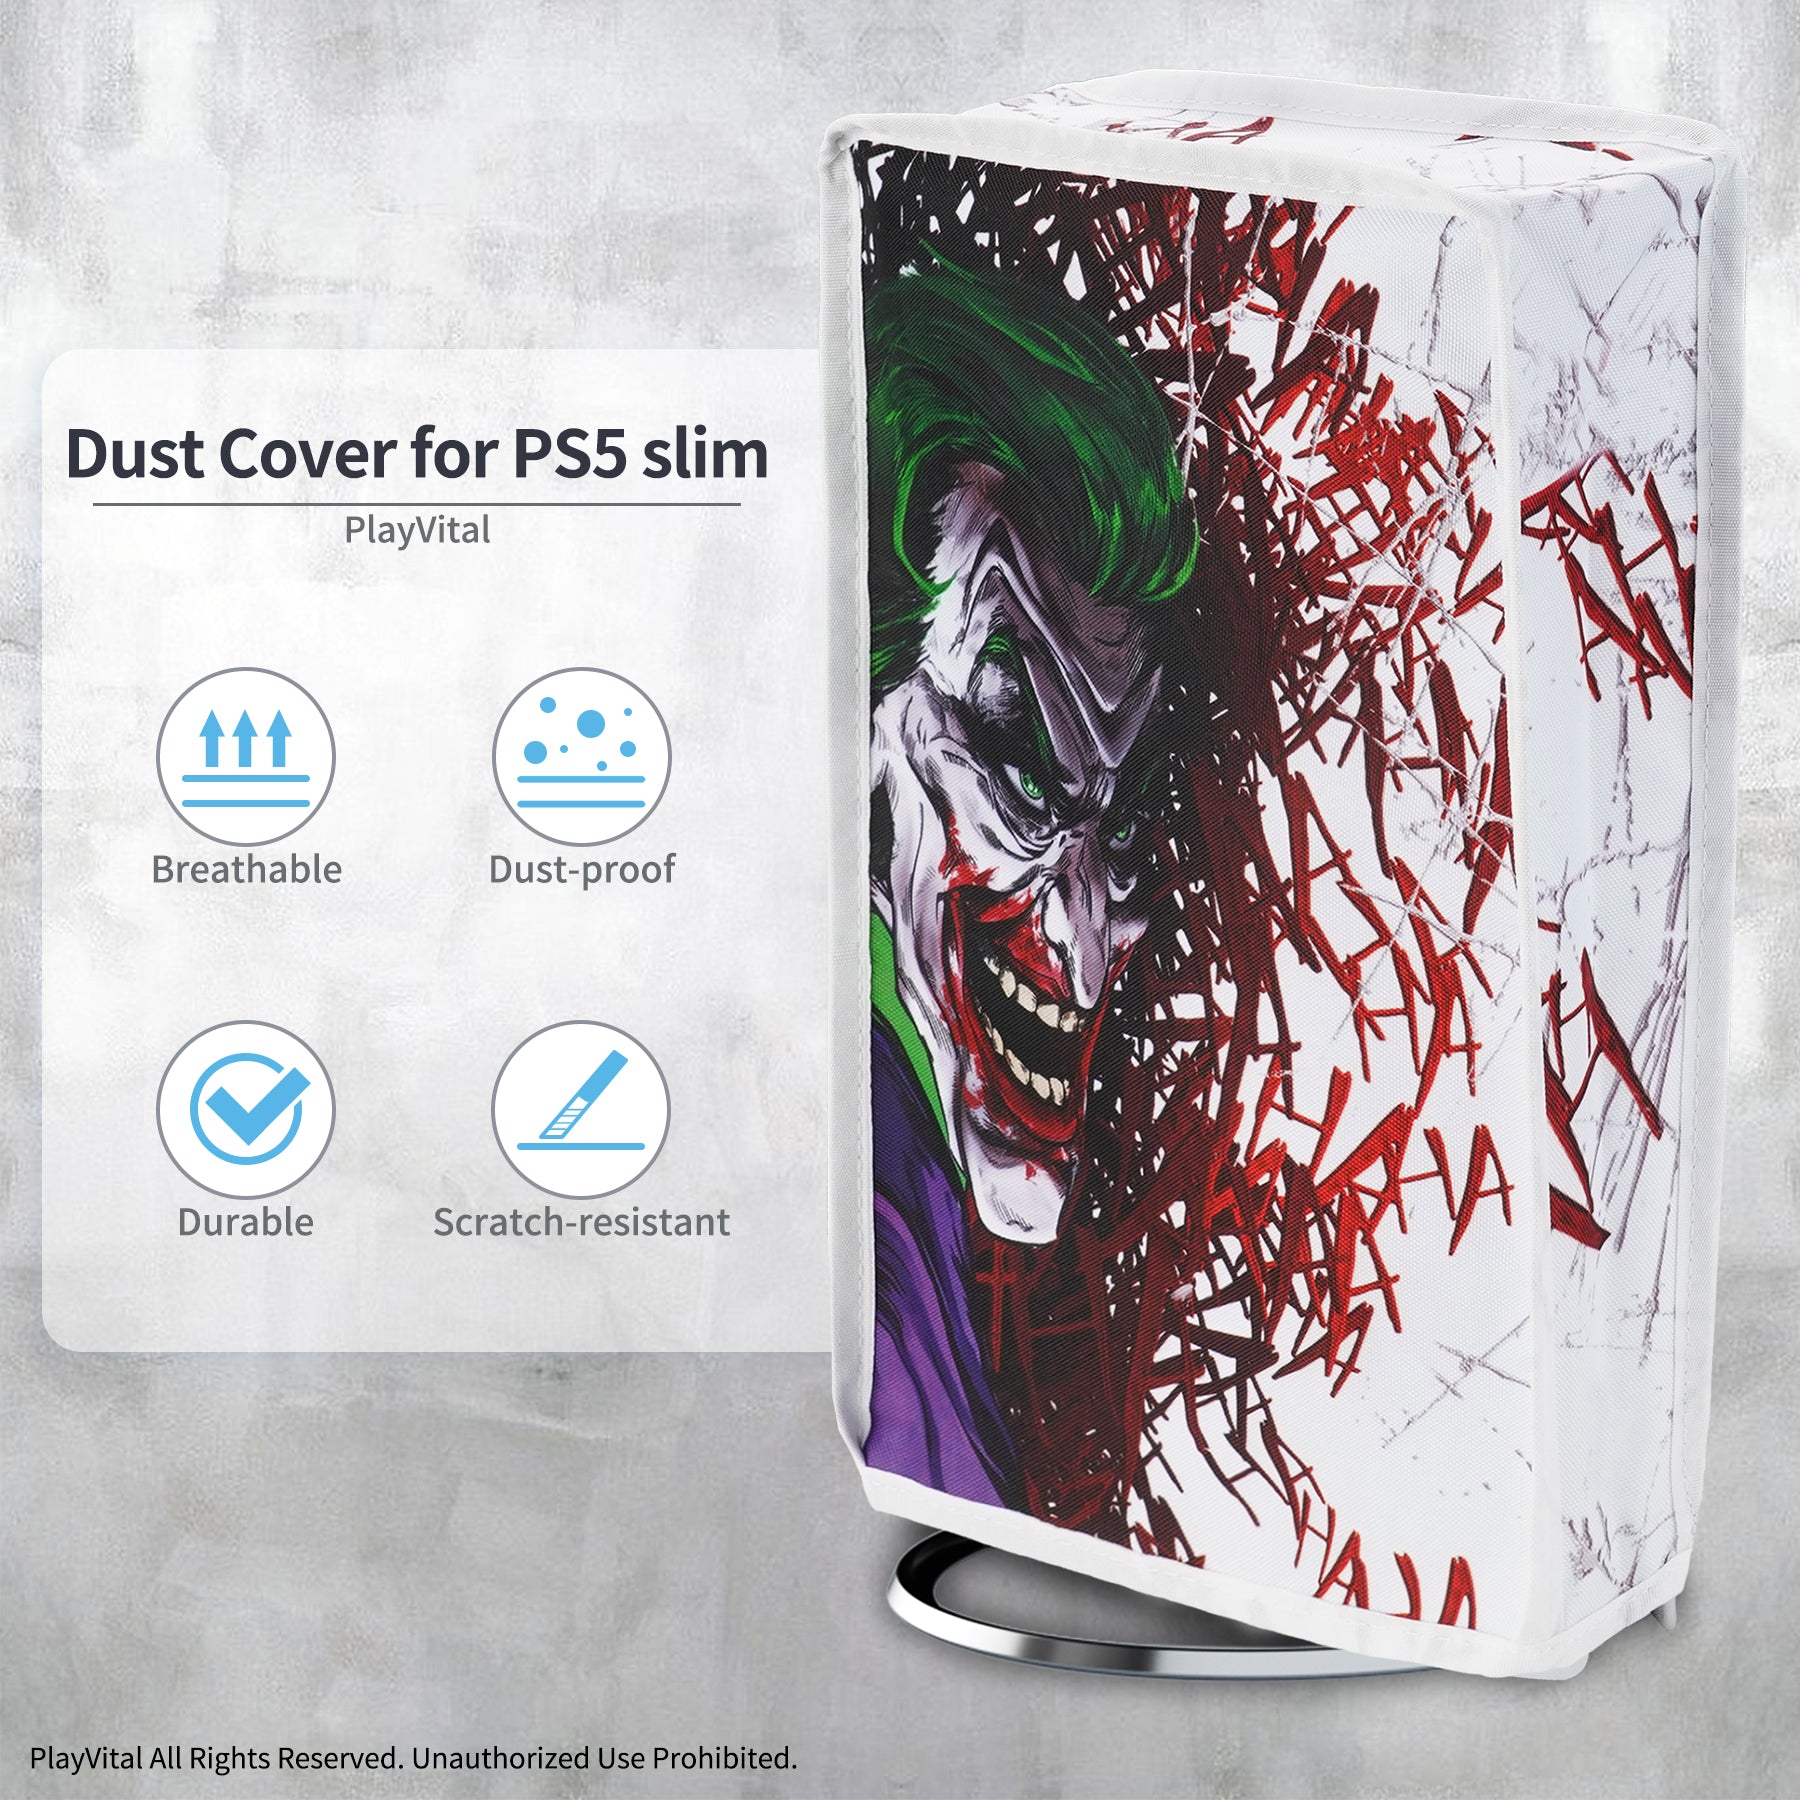 PlayVital Vertical Dust Cover for ps5 Slim Digital Edition(The New Smaller  Design), Transparent Dust Proof Protector Waterproof Cover Sleeve for ps5